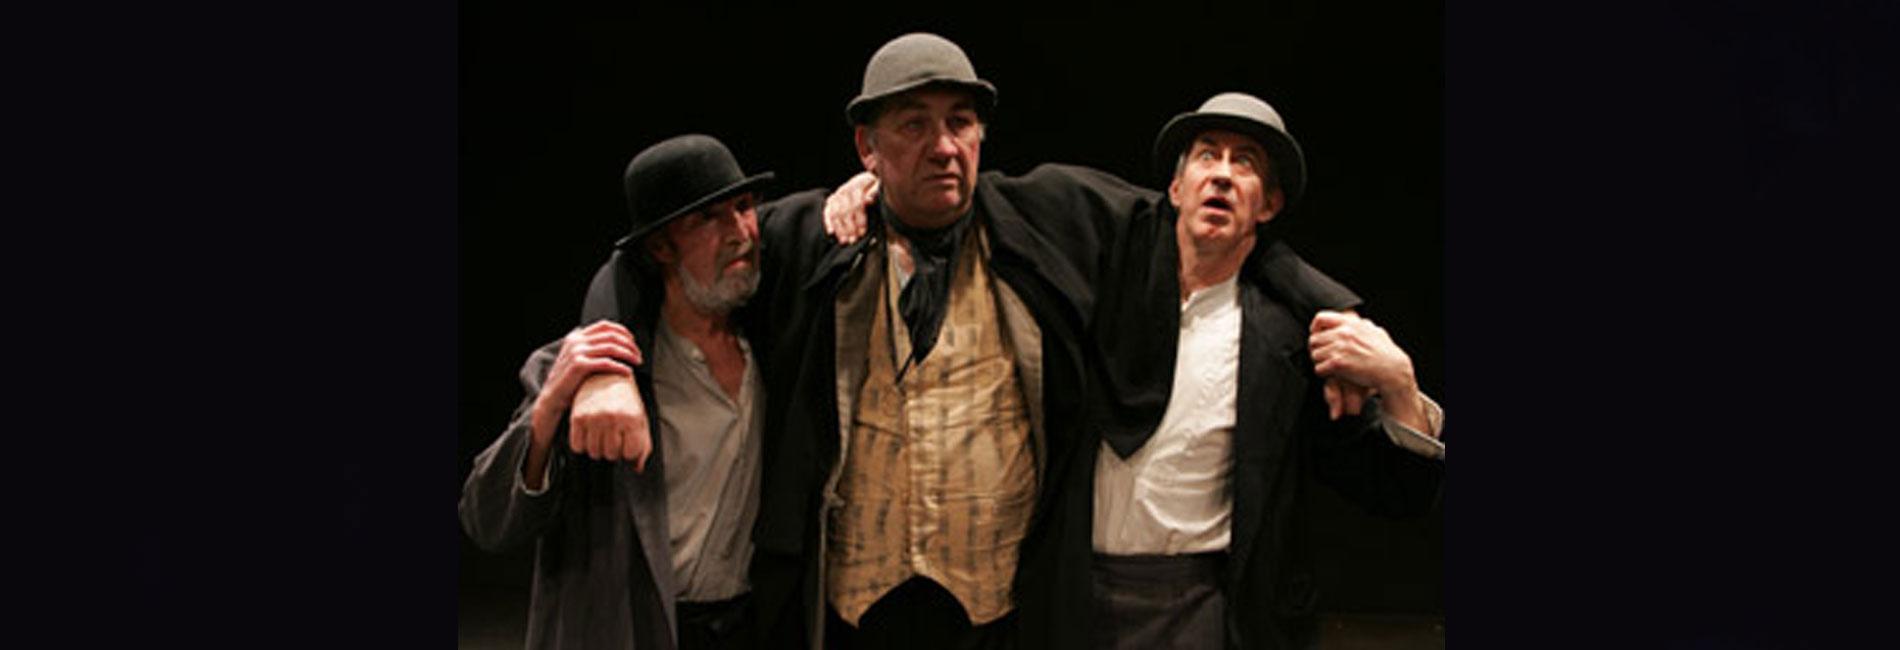 the new group waiting for godot